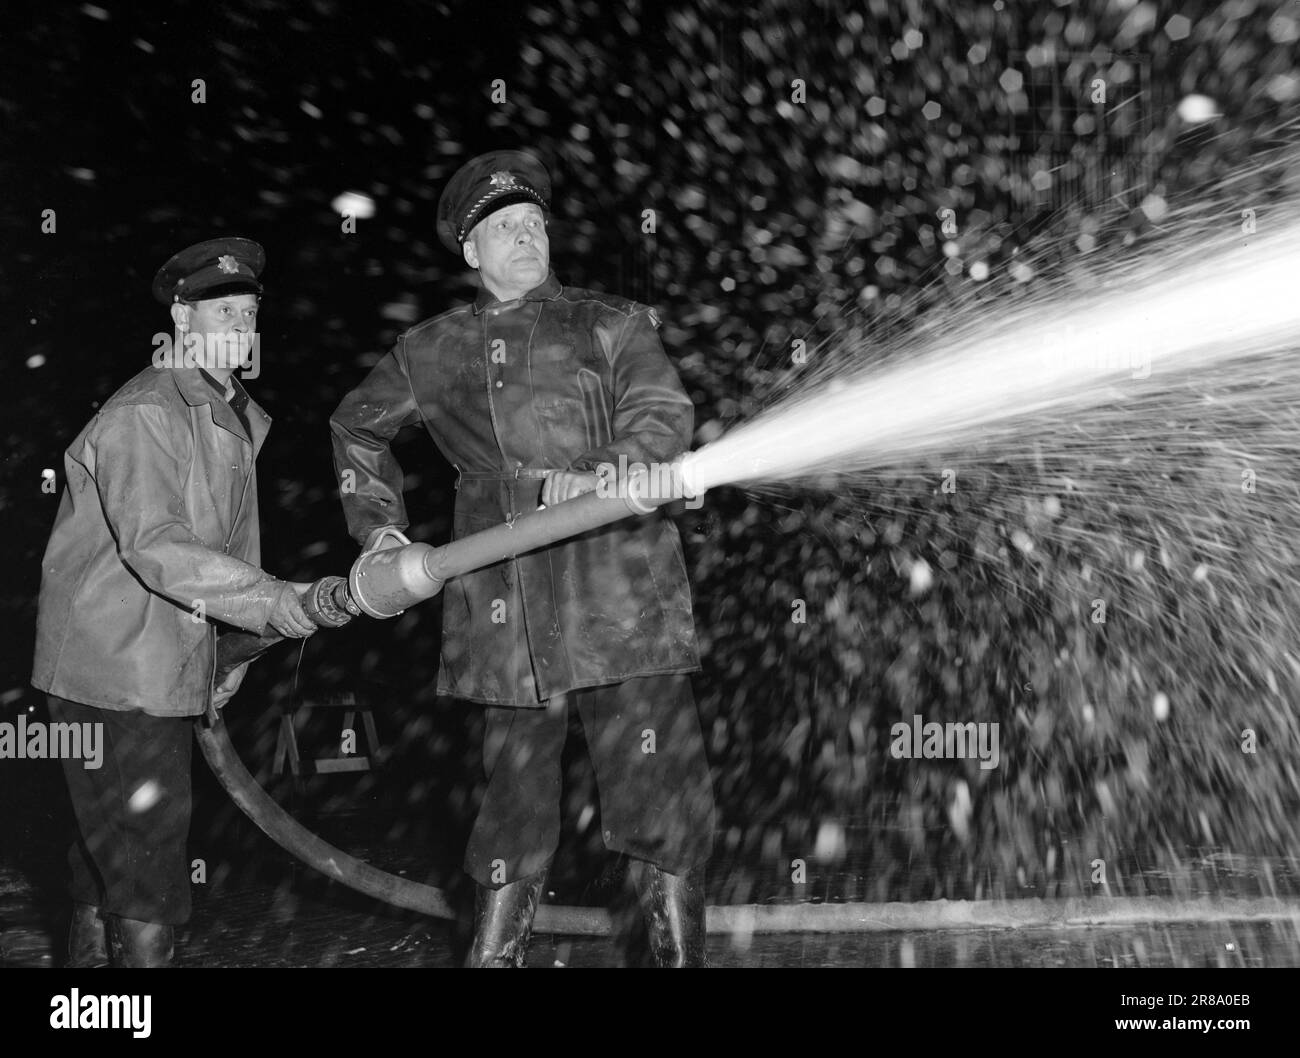 Current 21-5-1950: The fire brigade prepares for winterHenki Kolstad and Inger-Marie Andersen have the lead roles in the film 'Vi gifter oss', which is filmed in Oslo. To make it look like winter, even though the filming takes place in the autumn, the fire brigade has sprayed soap foam in the streets.  A mixture of water and liquid soap is whipped into foam in this comet jet tube, and in a few seconds fire constable Larsen and fire foreman Jacobsen have created the softest Christmas atmosphere out of a gray autumn street.  Photo: Sverre A. Børretzen / Aktuell / NTB ***PHOTO NOT IMAGE PROCESSED Stock Photo